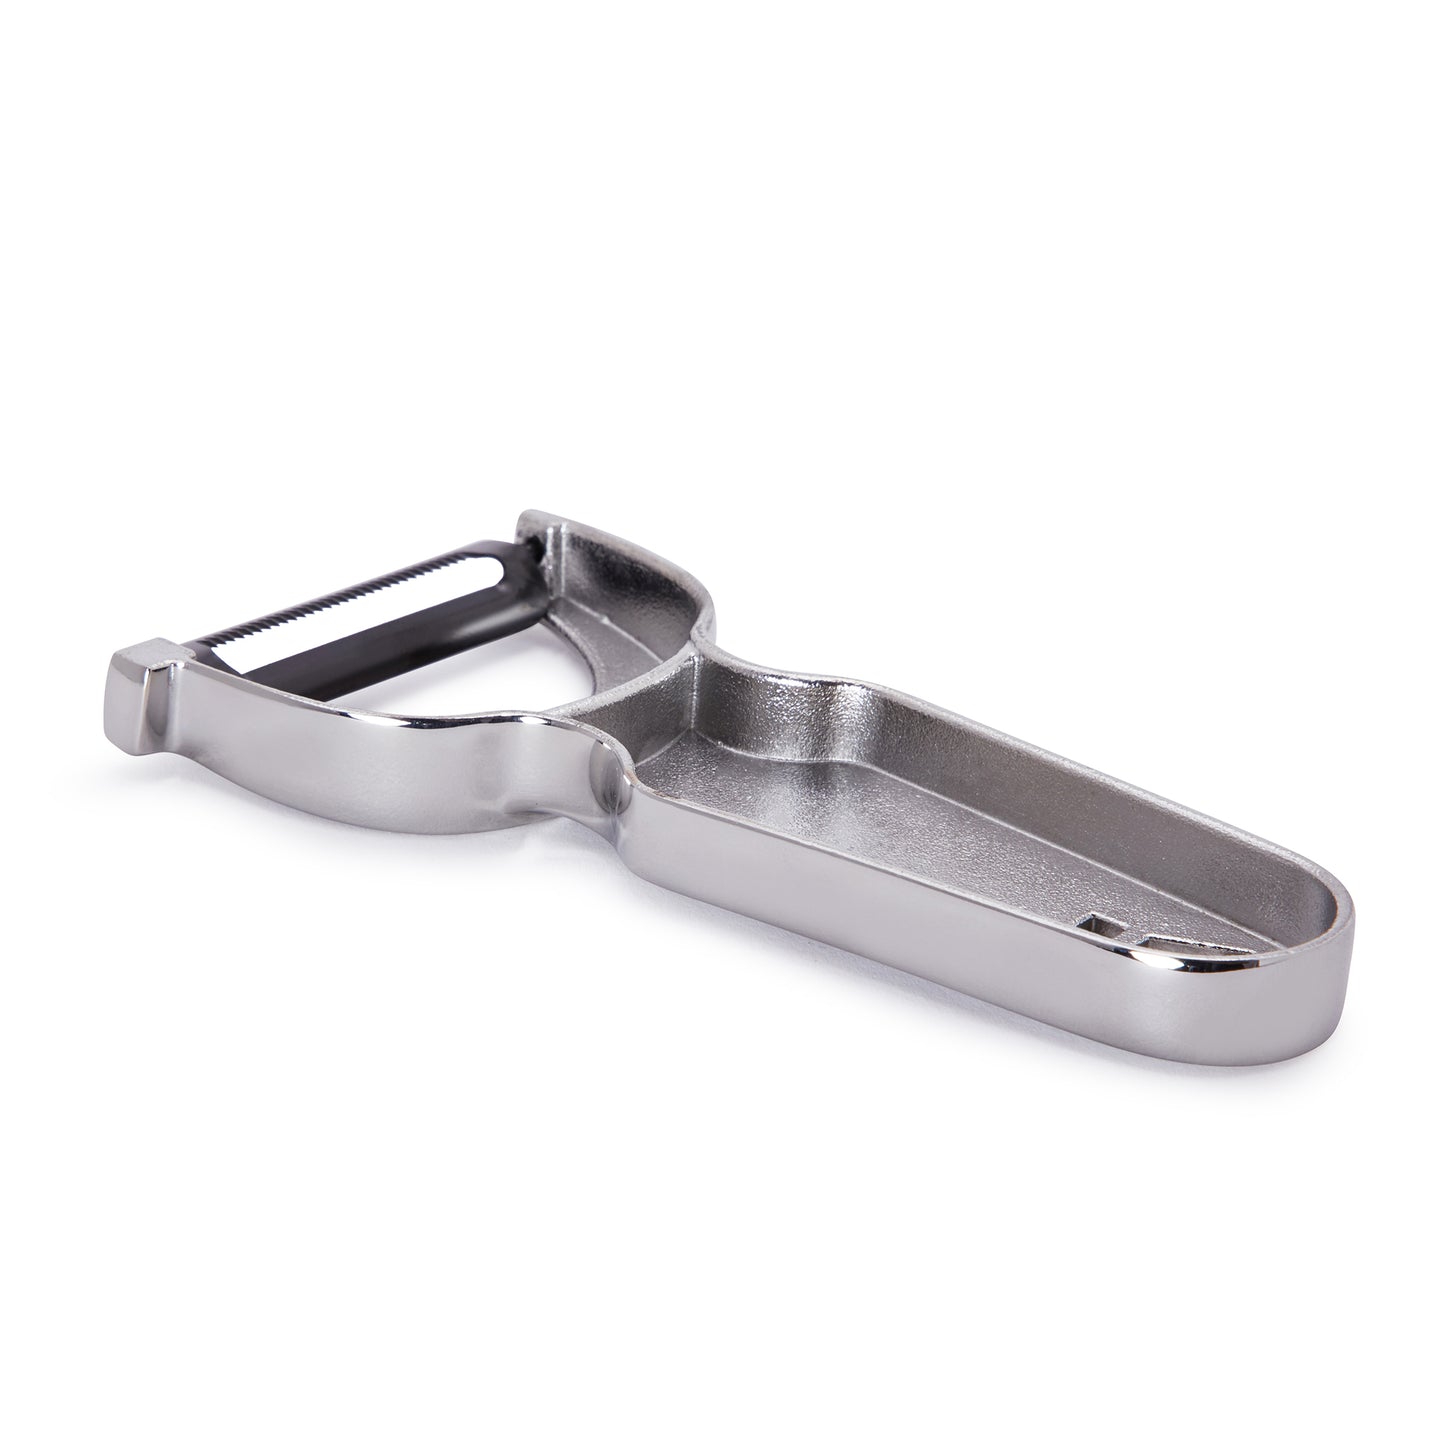 BUSWELL® CAST METAL PEELER – SERRATED / STAINLESS STEEL